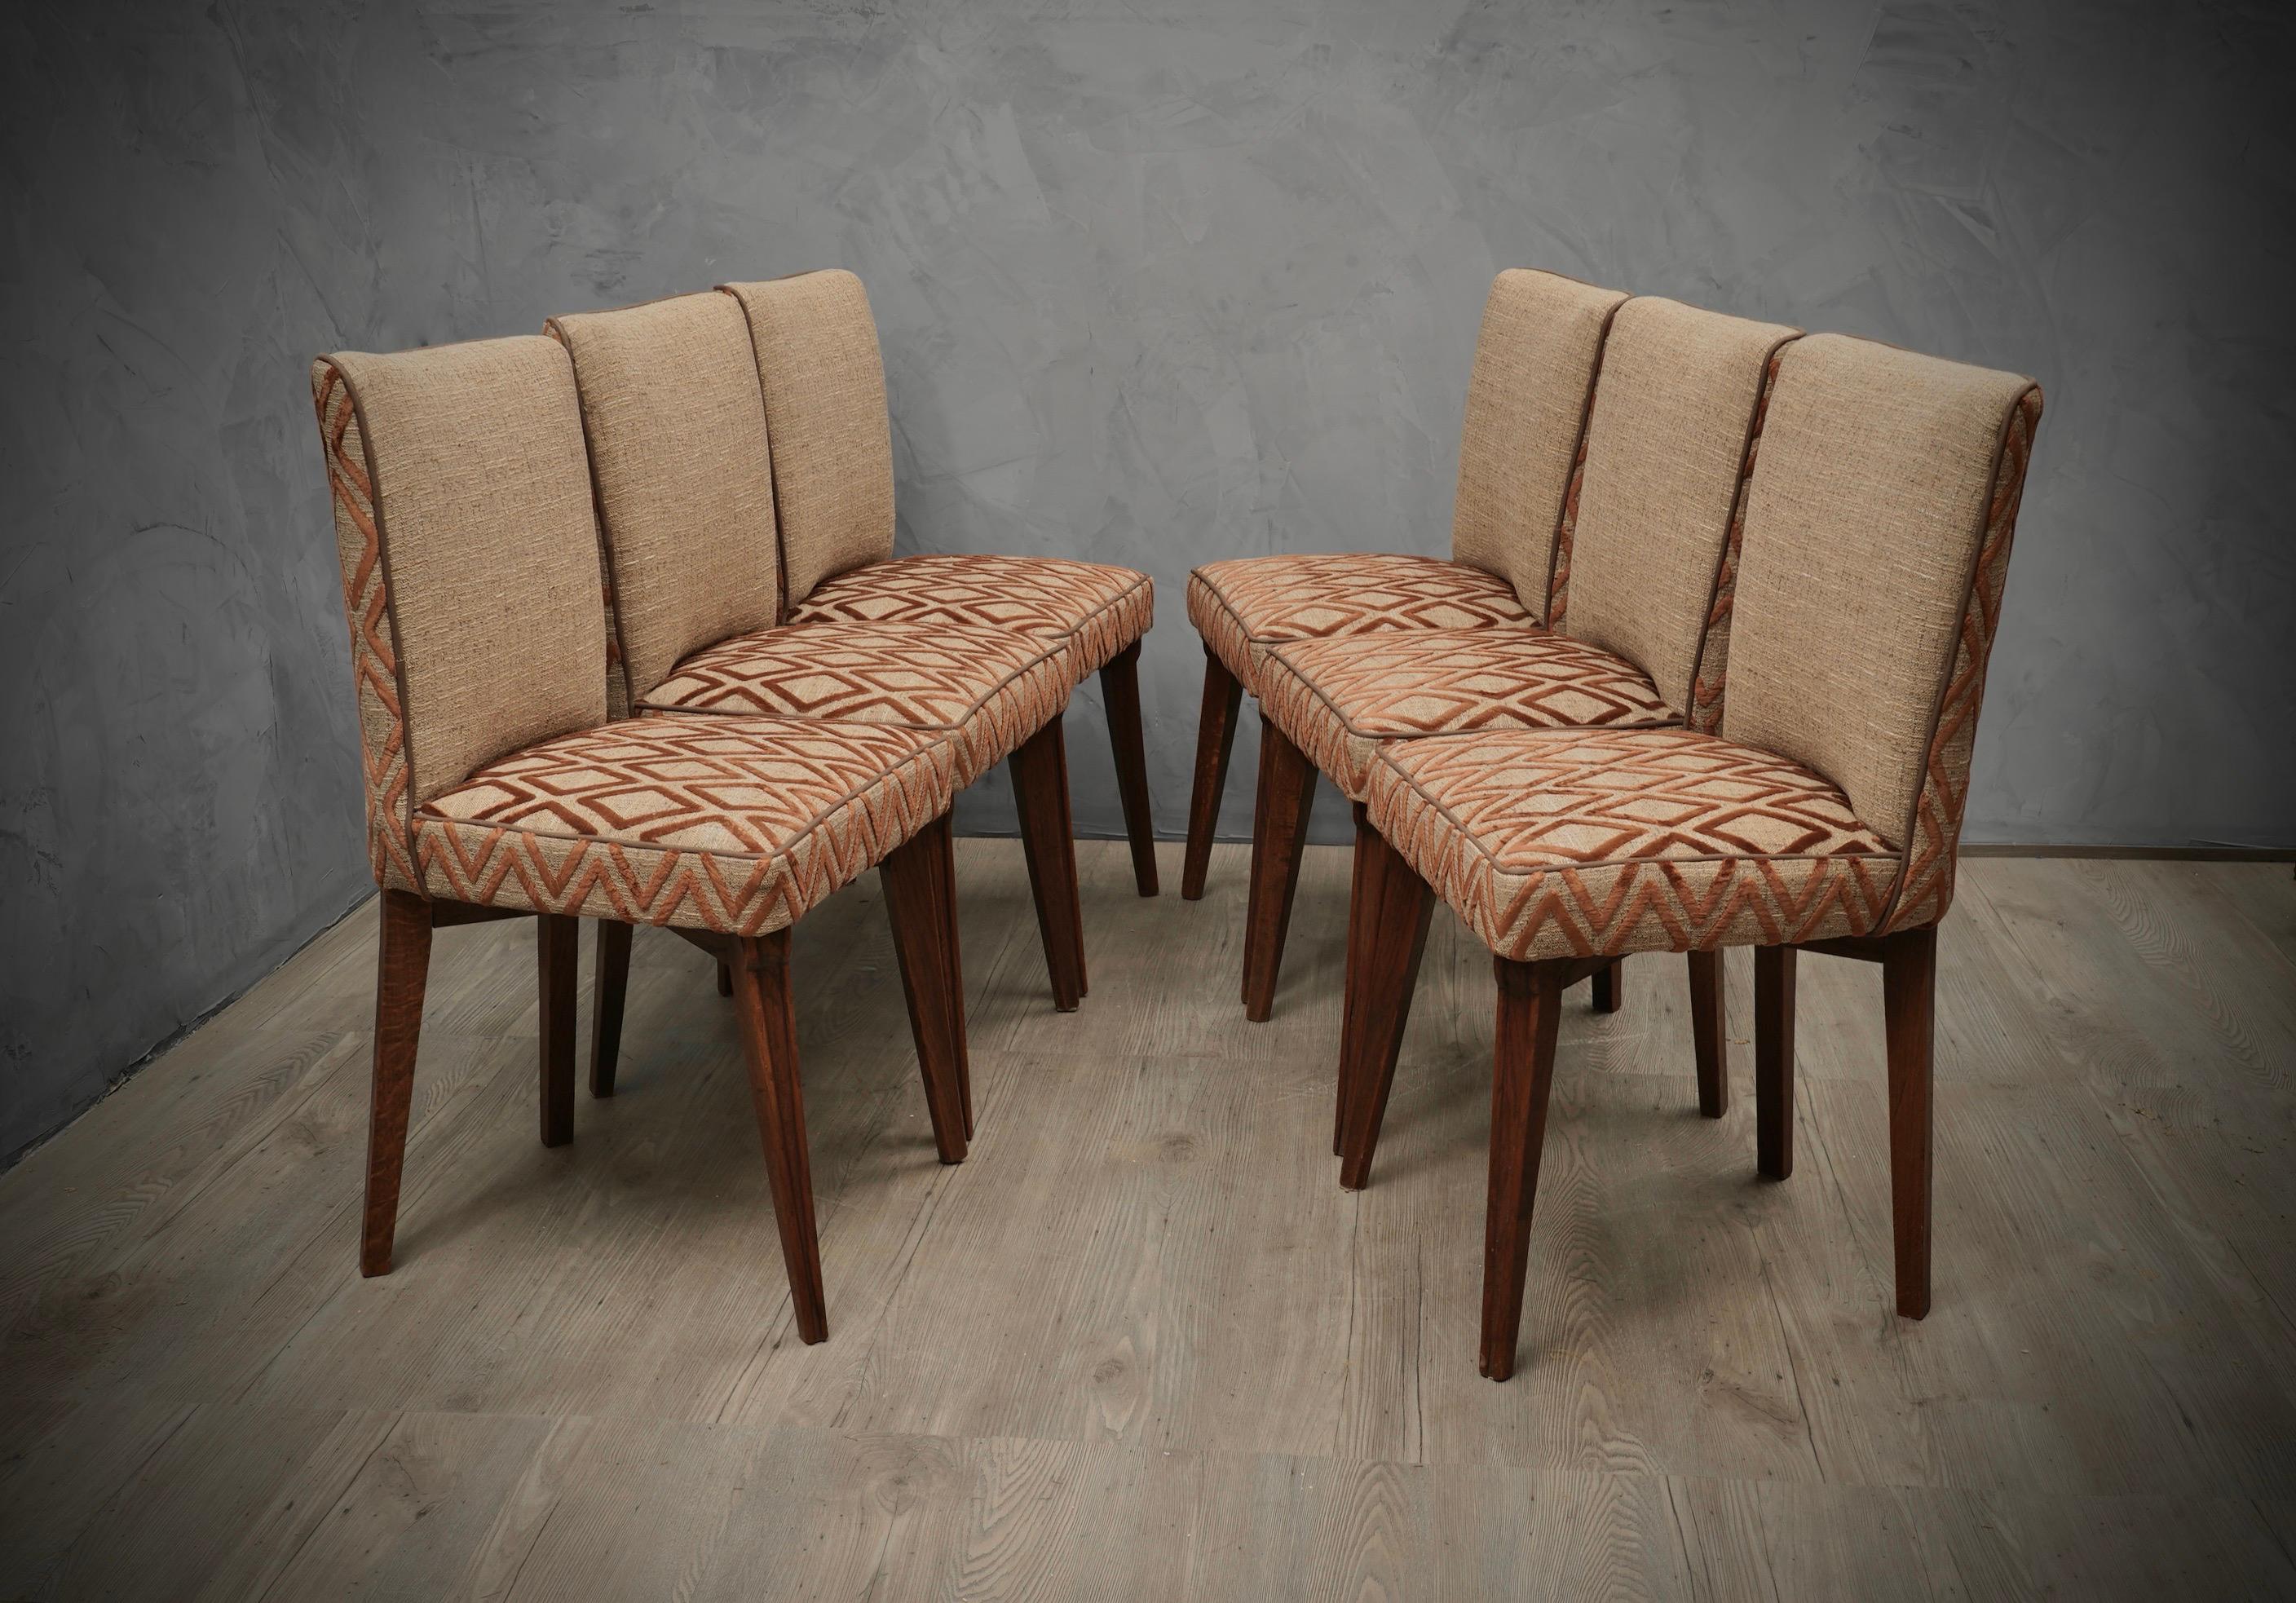 Pierluigi Colli Ash Wood and Brown Fabric Italian Dinning Room Chairs, 1950 For Sale 6